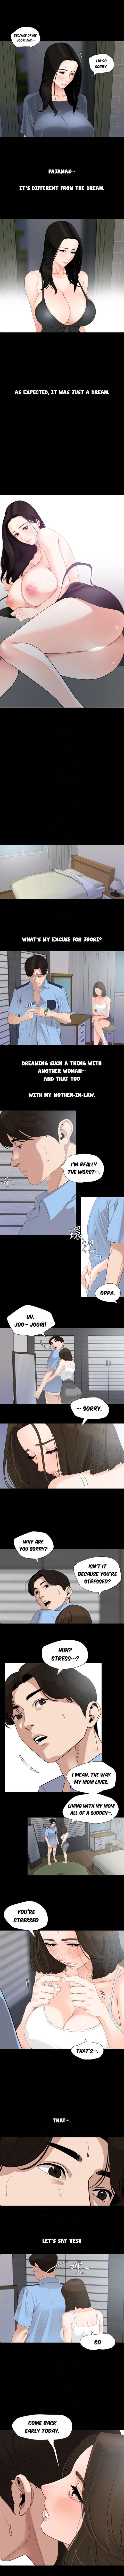 [kkamja] Don't Be Like This! Son-In-Law [English] [Ongoing] 39